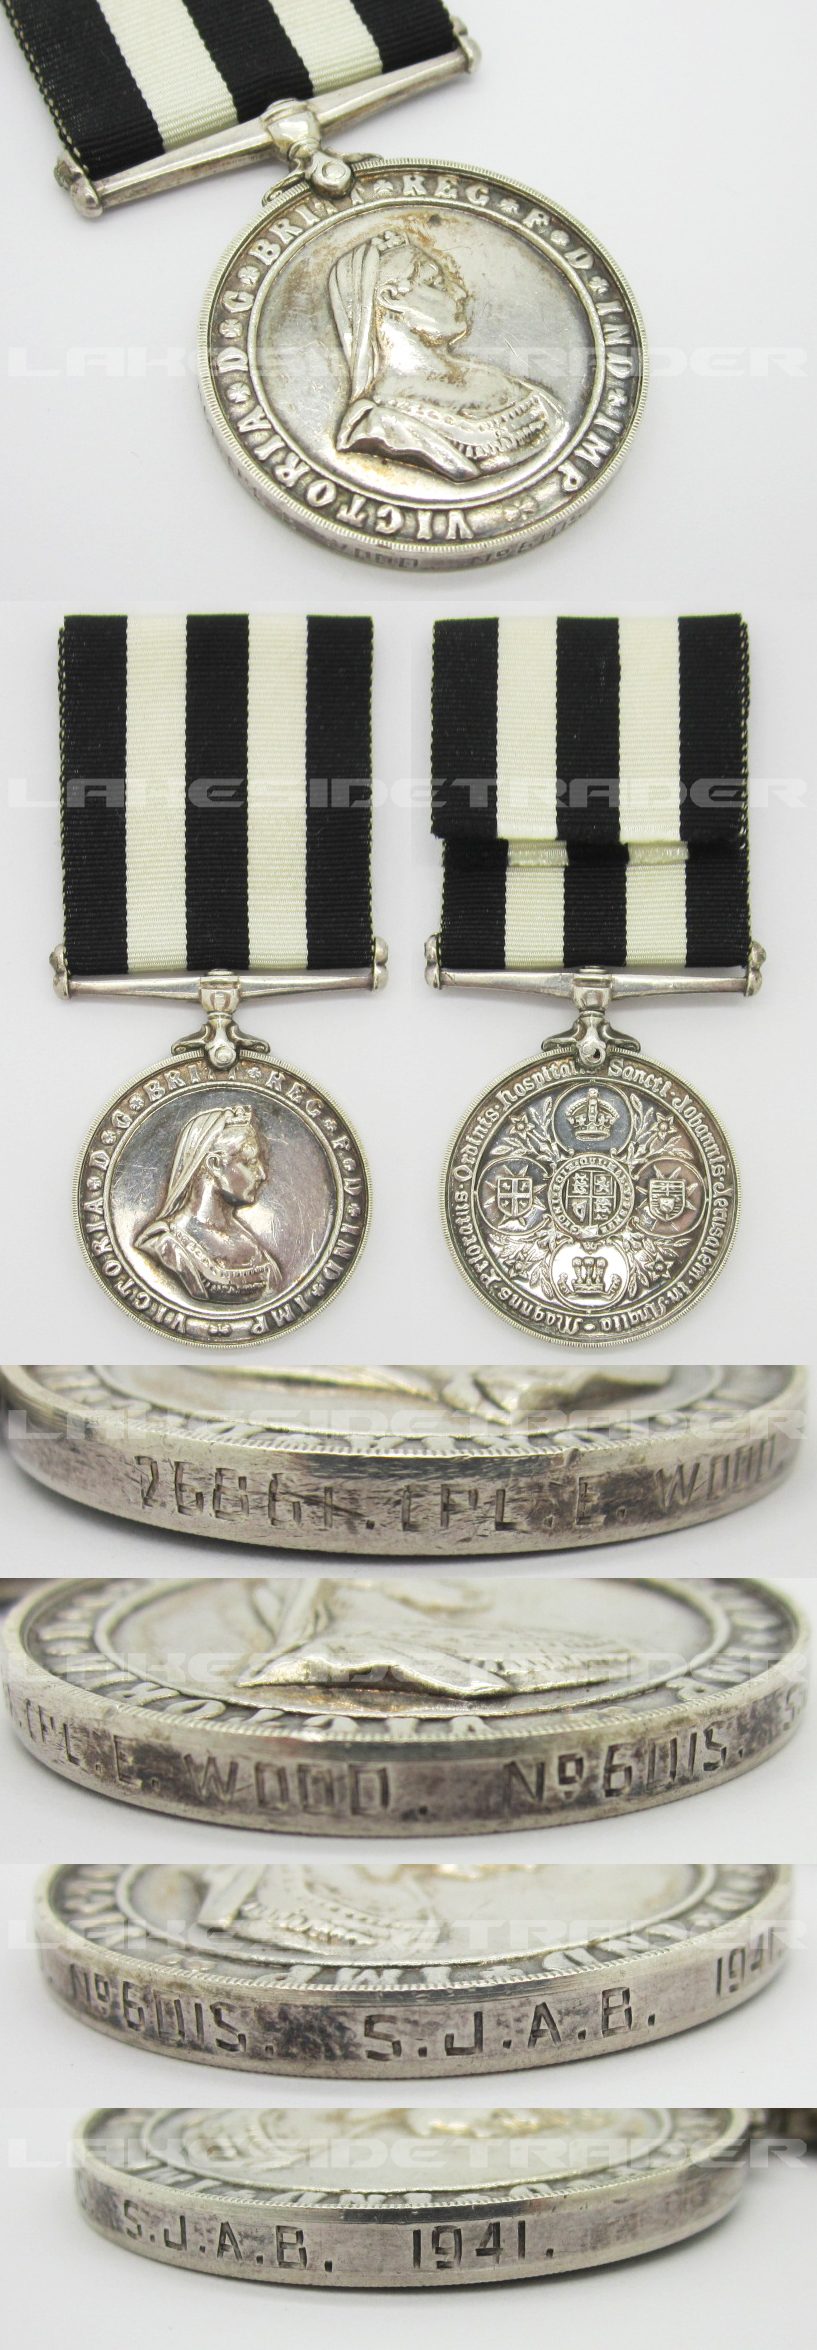 Service Medal of the Order of St John